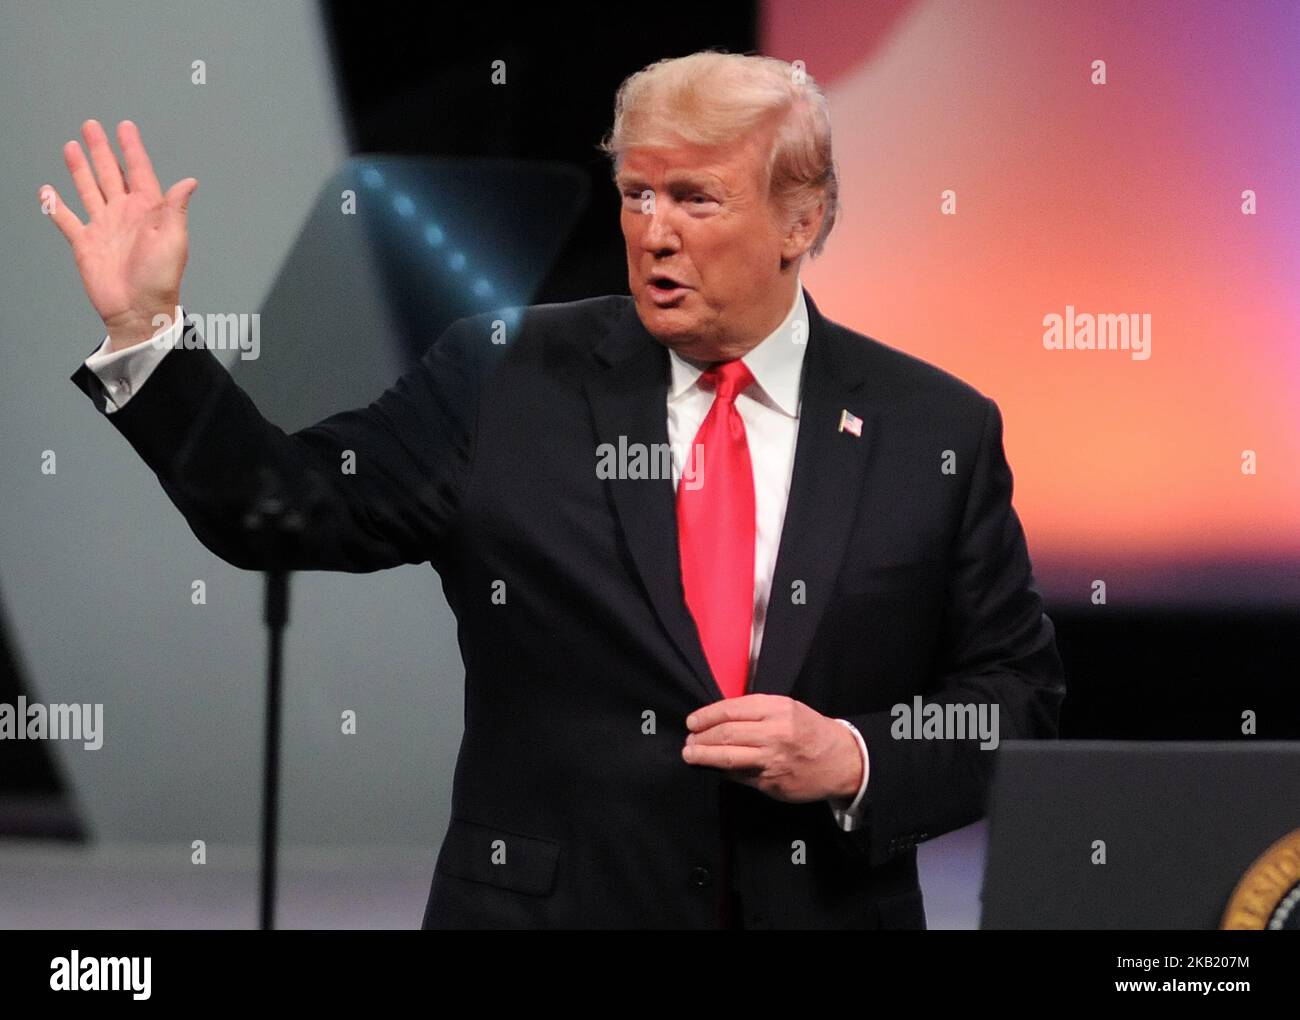 October 8, 2018 - Orlando, Florida, United States - U.S. President Donald Trump waves as he arrives on stage to address attendees at the International Association of Chiefs of Police Annual Convention on October 8, 2018 at the Orange County Convention Center in Orlando, Florida. (Photo by Paul Hennessy/NurPhoto) Stock Photo